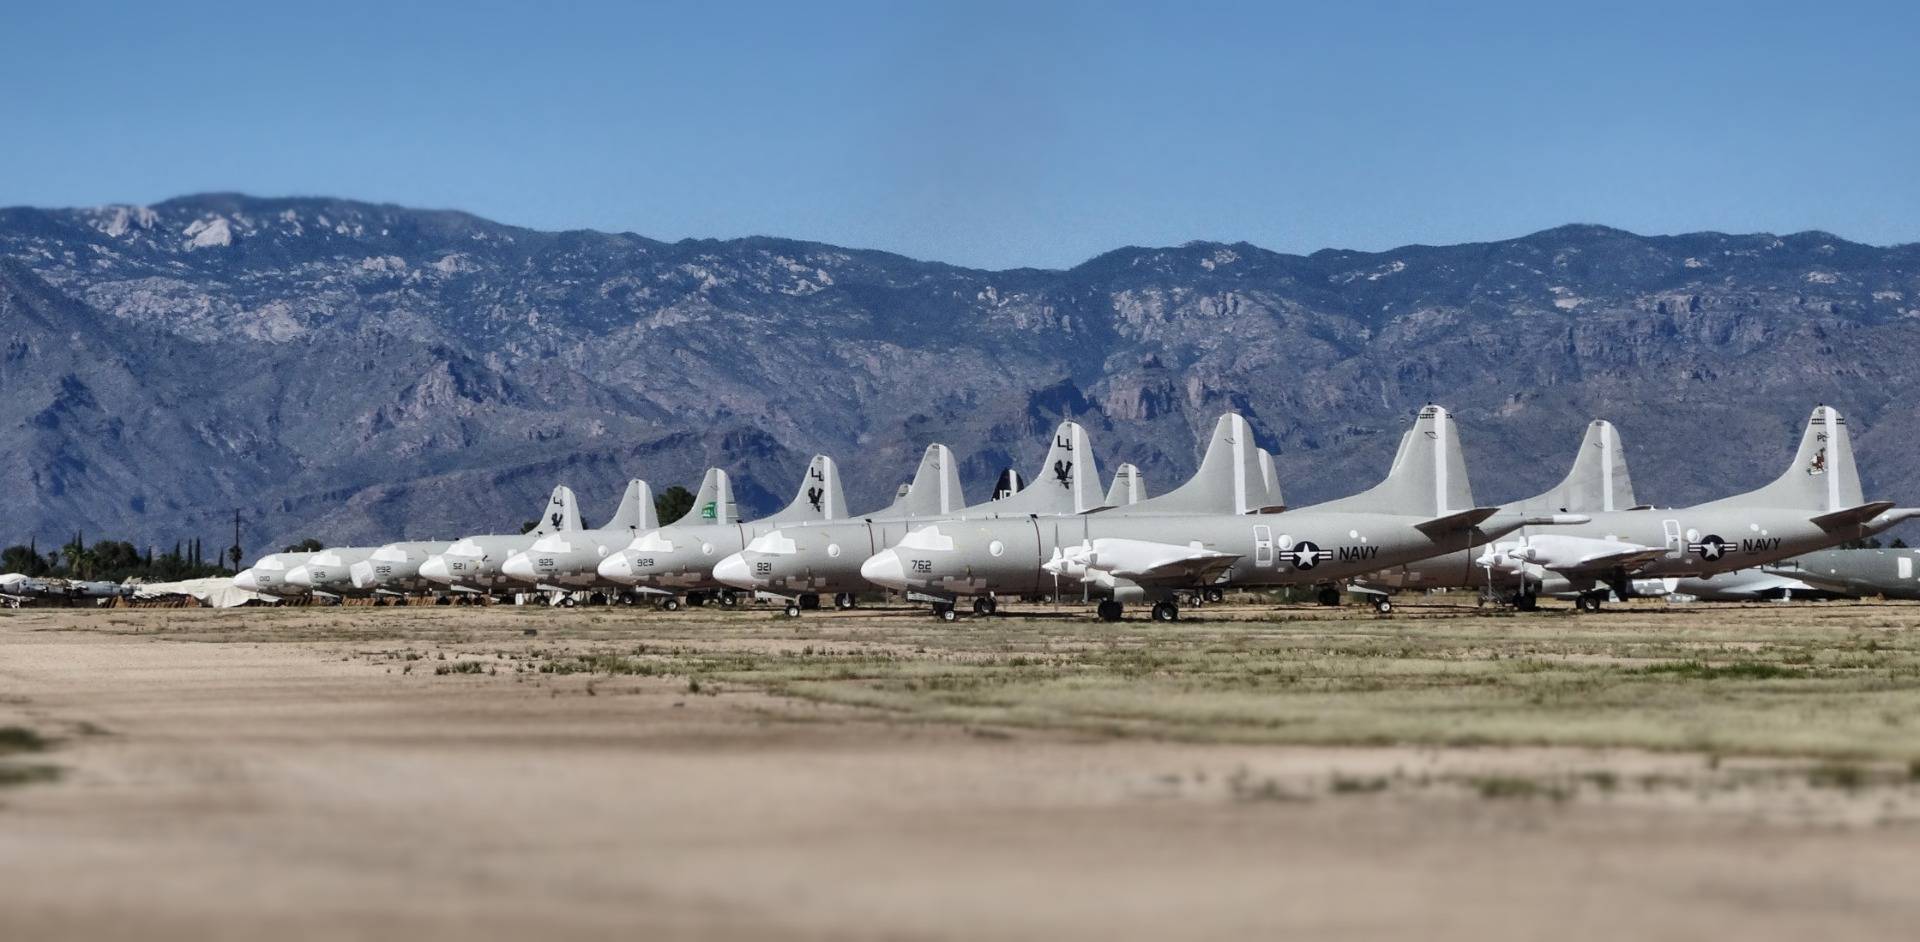 4000 aircrafts are waiting for better times at Pima.